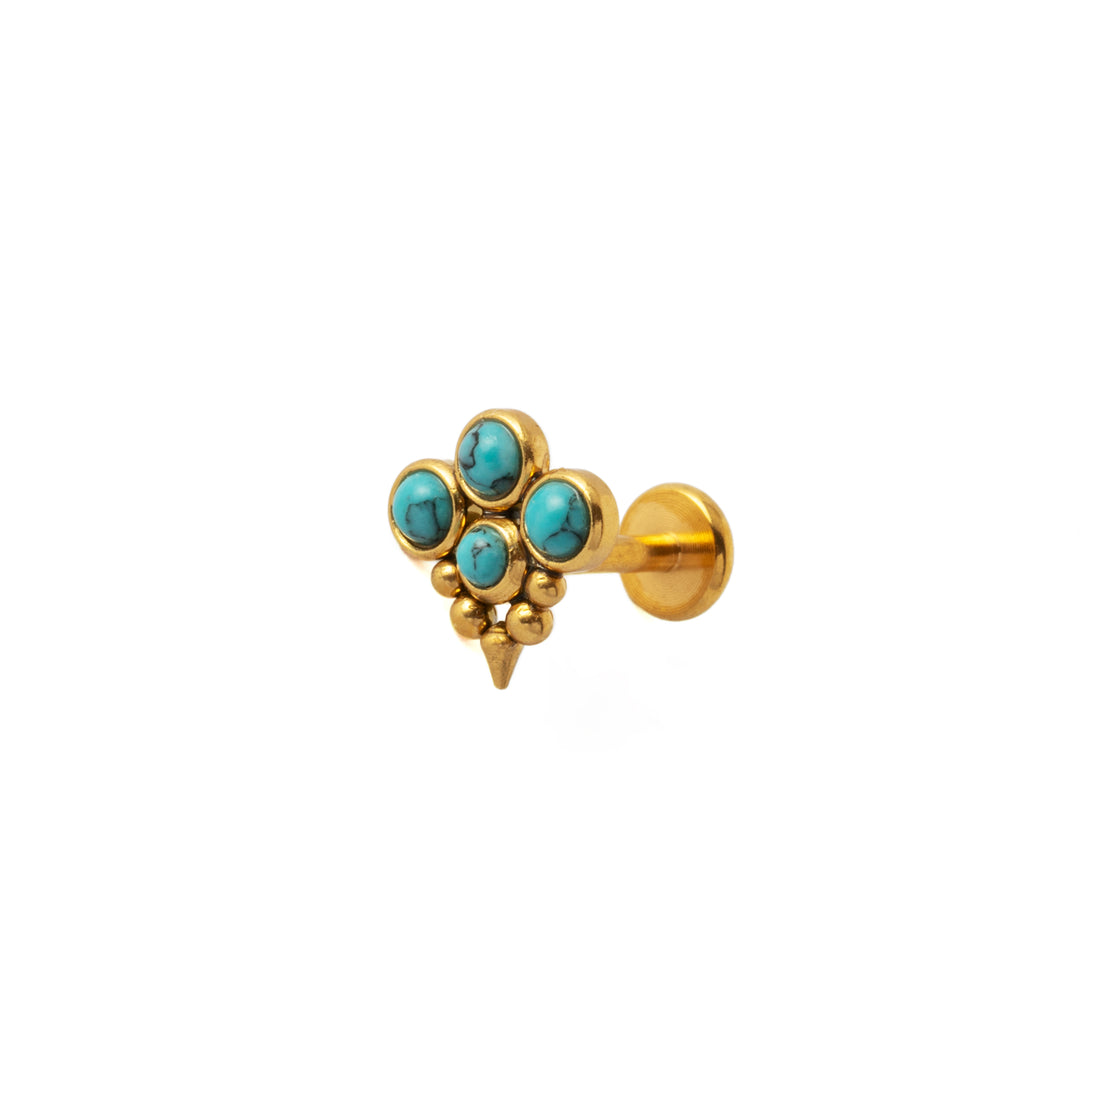 Brenna Golden Labret with Turquoise right side view